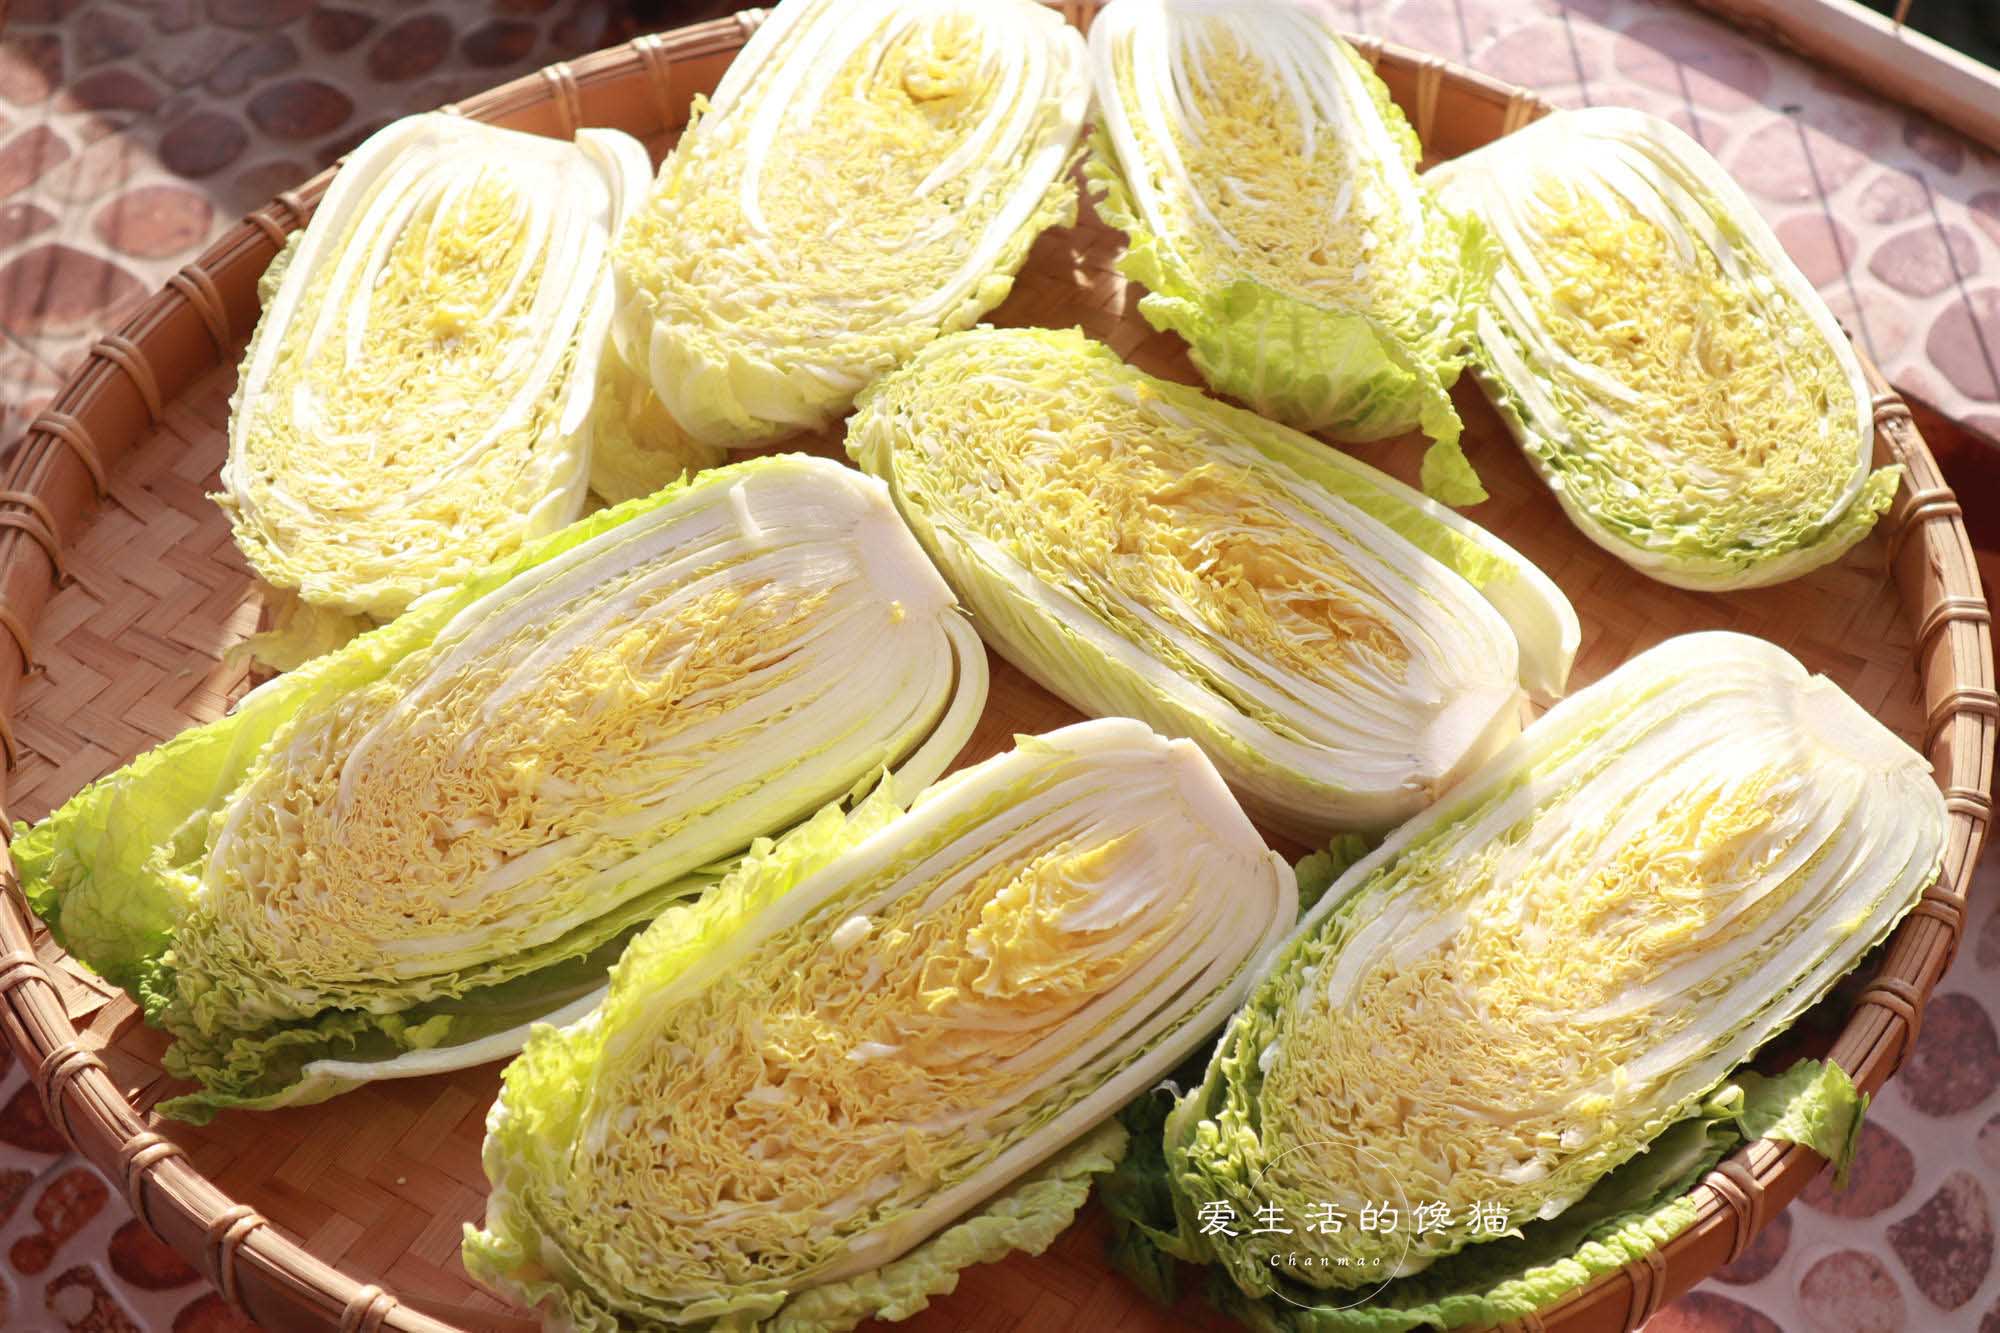 How to make silage cabbage without salt, no scum, delicious and good for health - 1